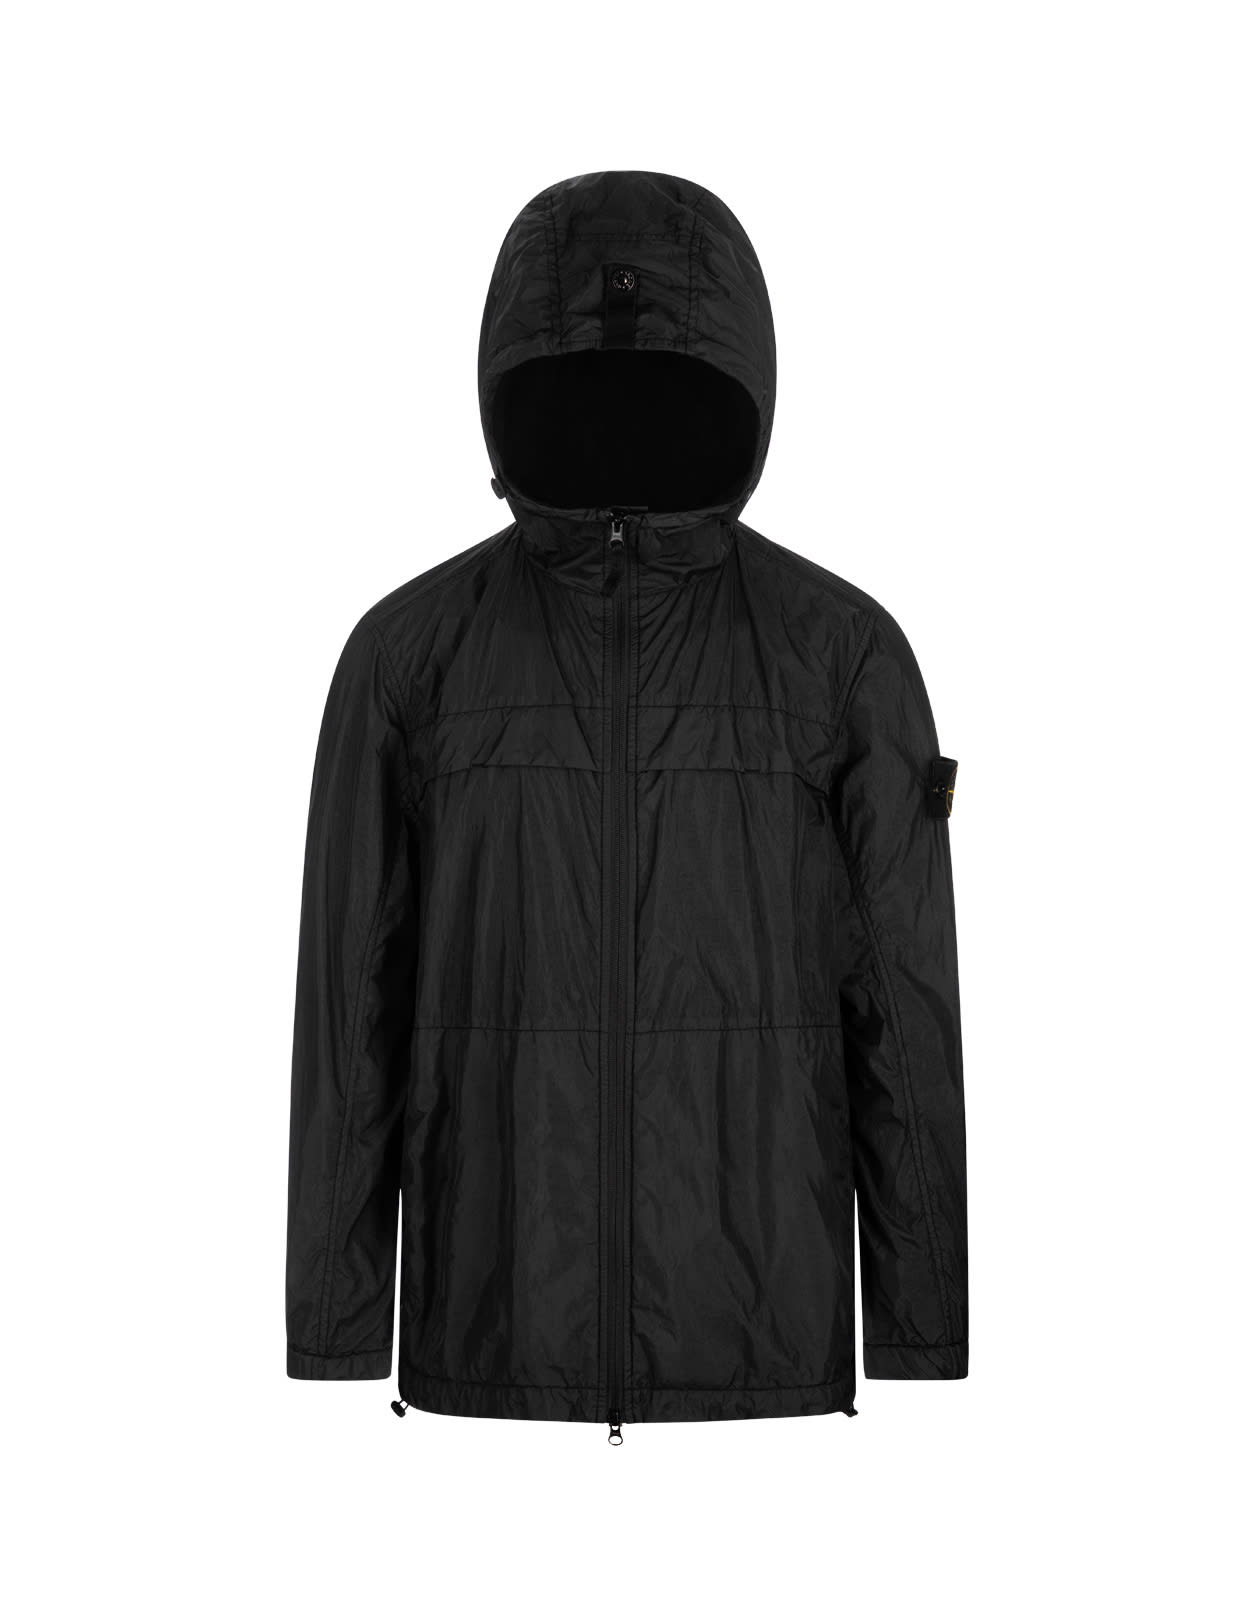 Stone Island Garment Dyed Crinkle Reps R-ny Lightweight Jacket In Black